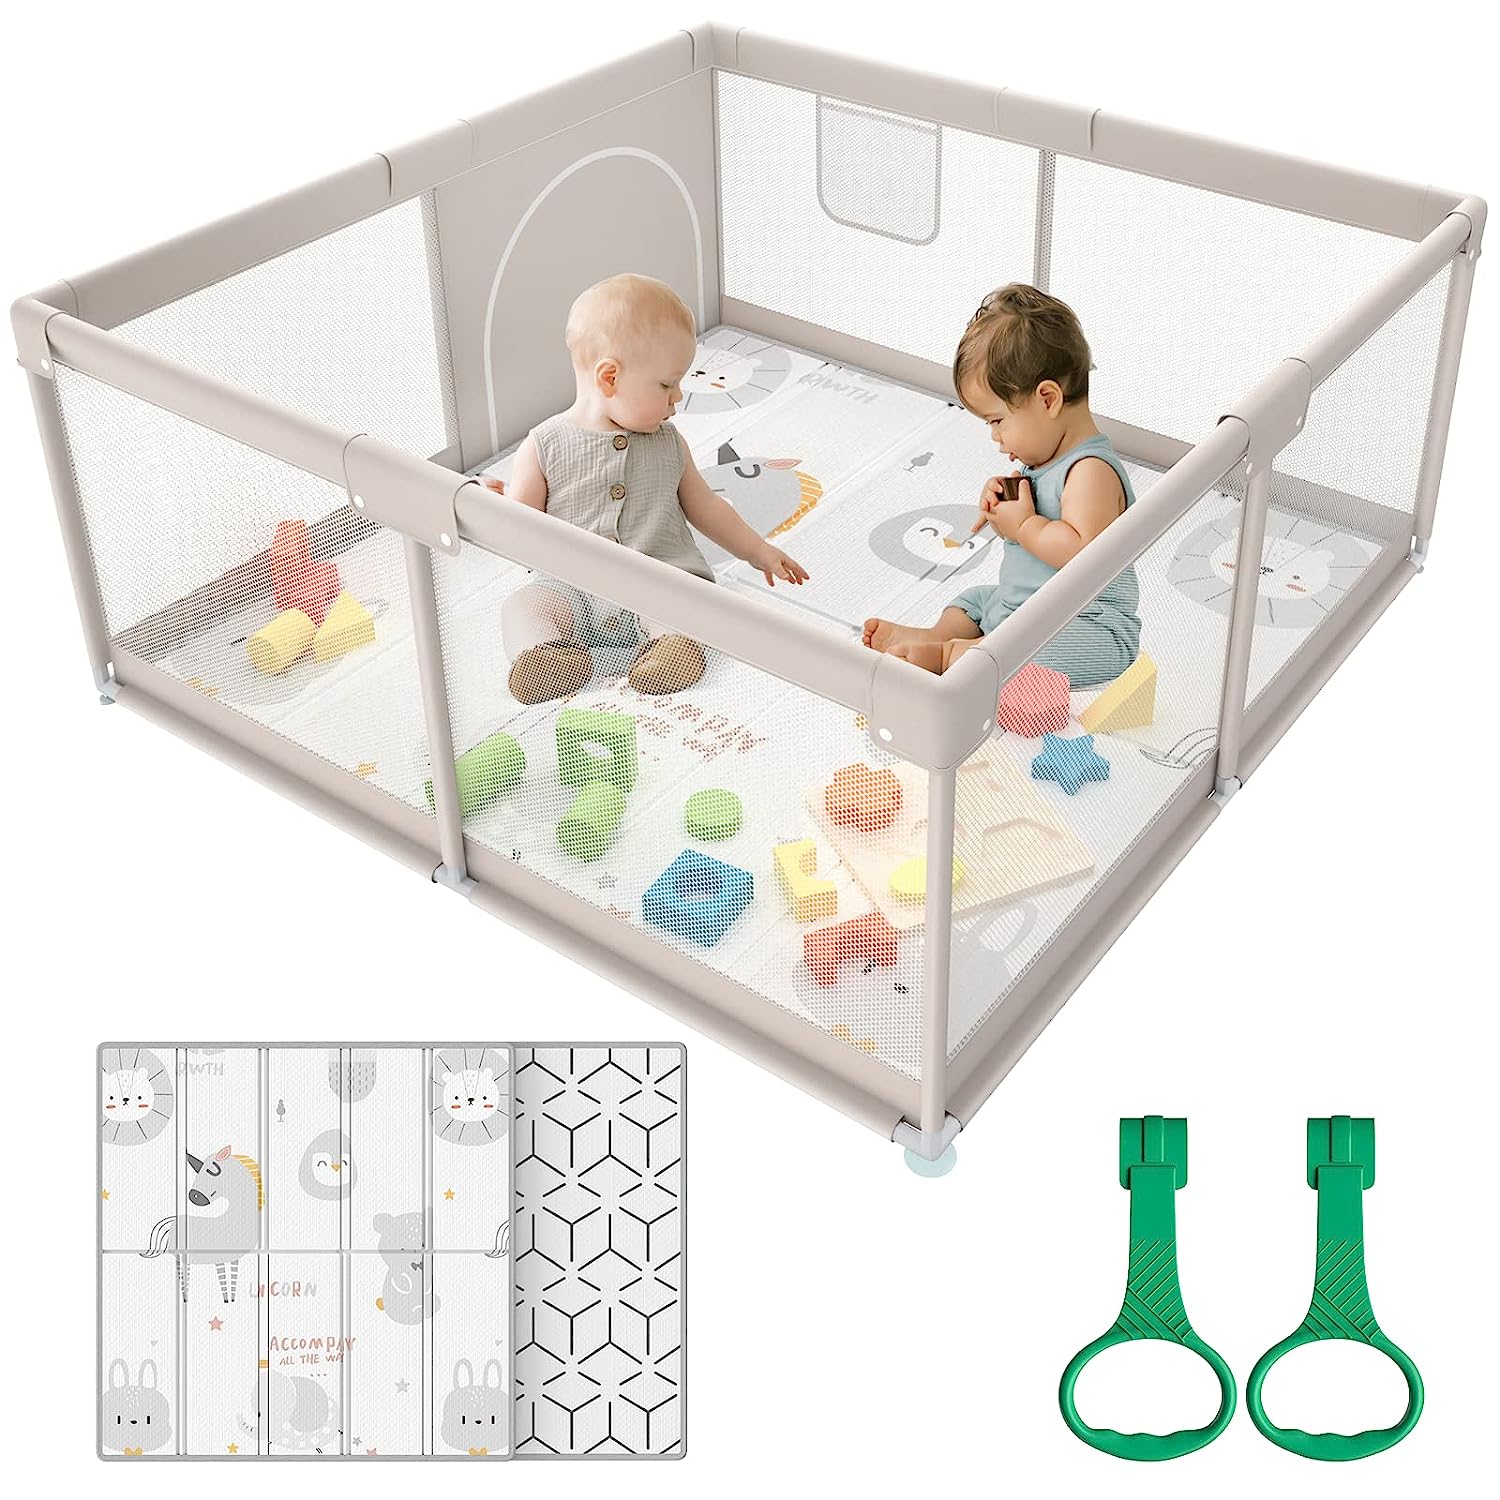 Small Baby Playpen 36 X 36, LUTIKIANG Play Pen for Babies and